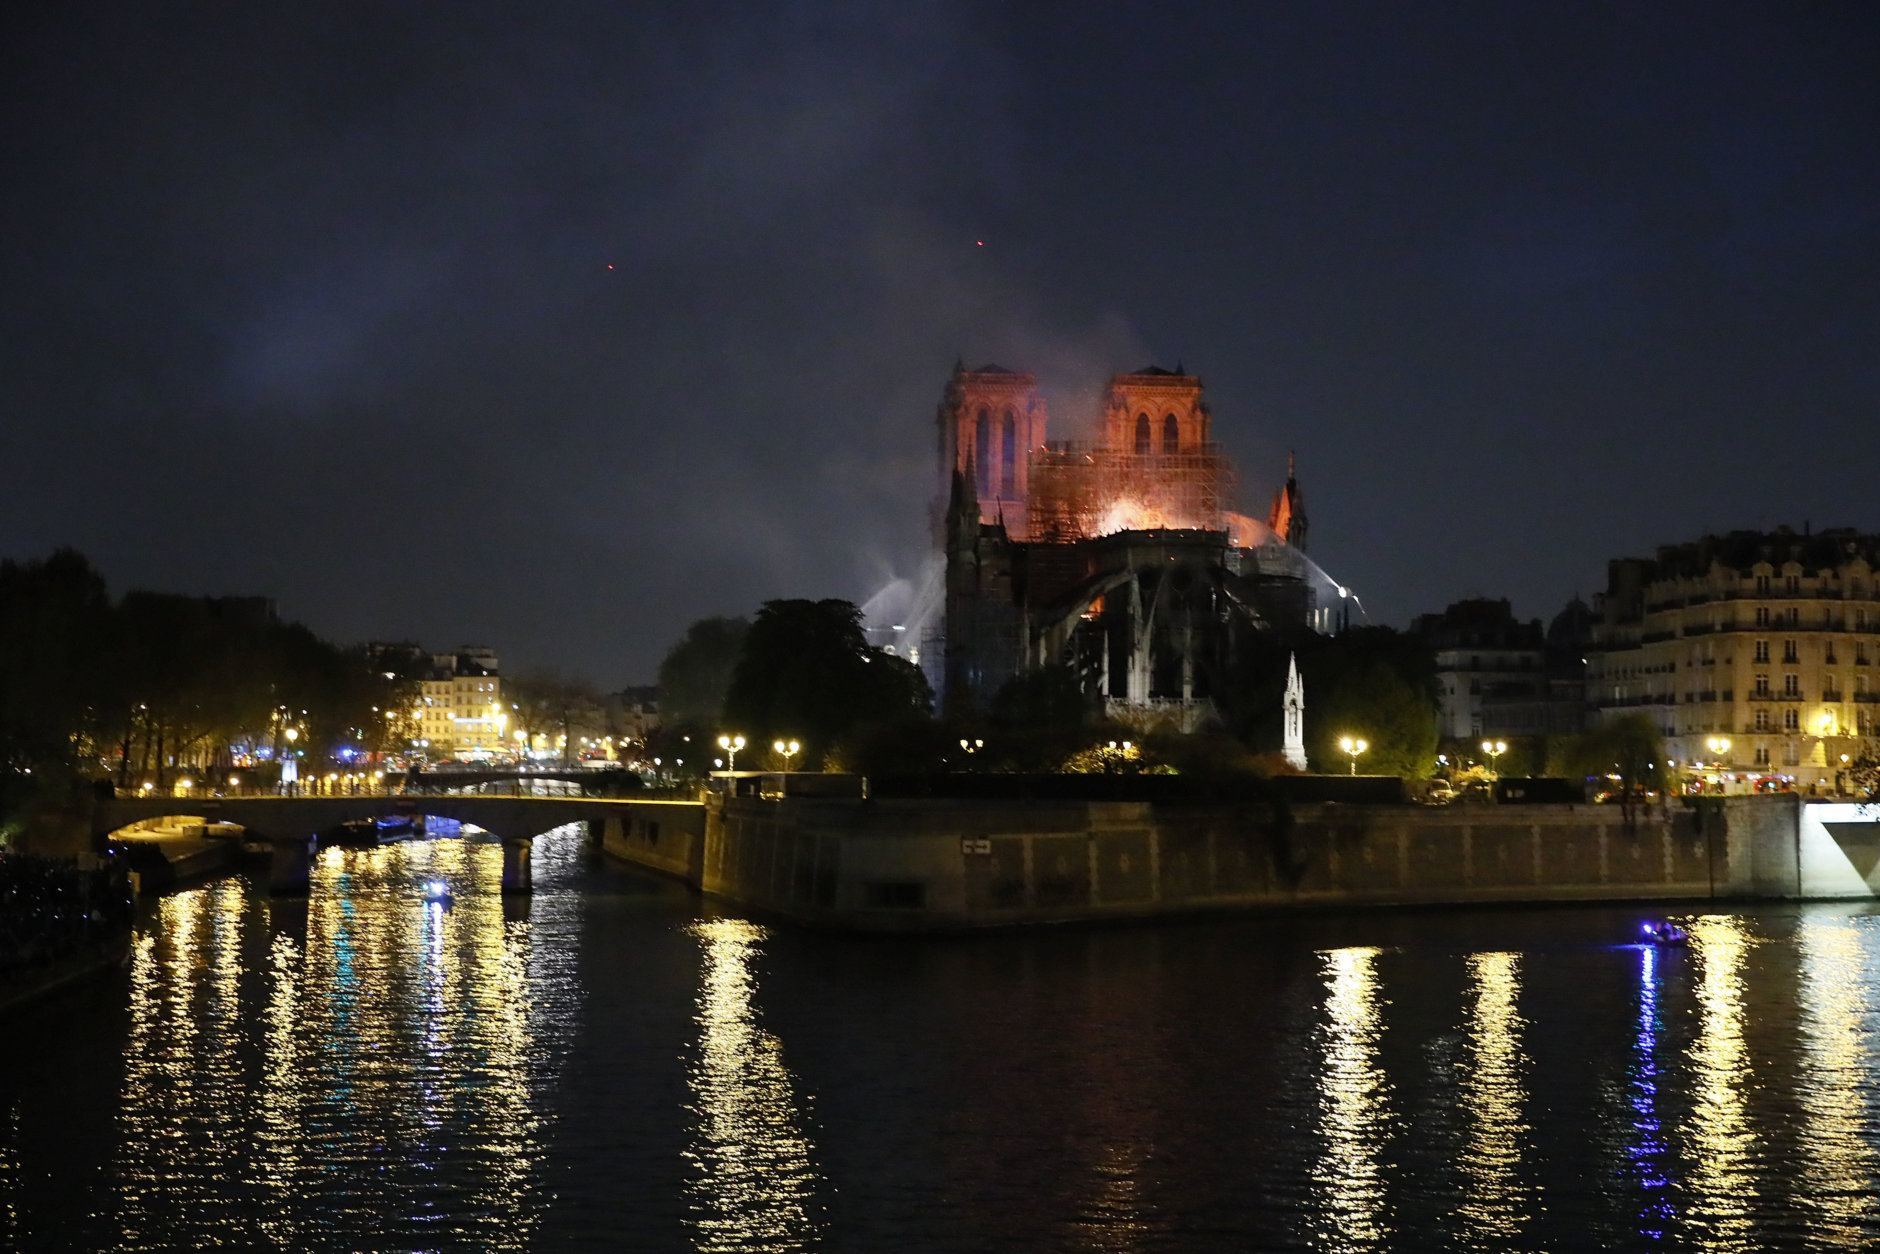 Notre Dame cathedral is seen burning in Paris, Monday, April 15, 2019. A catastrophic fire engulfed the upper reaches of Paris' soaring Notre Dame Cathedral as it was undergoing renovations Monday, threatening one of the greatest architectural treasures of the Western world as tourists and Parisians looked on aghast from the streets below. (AP Photo/Francois Mori)